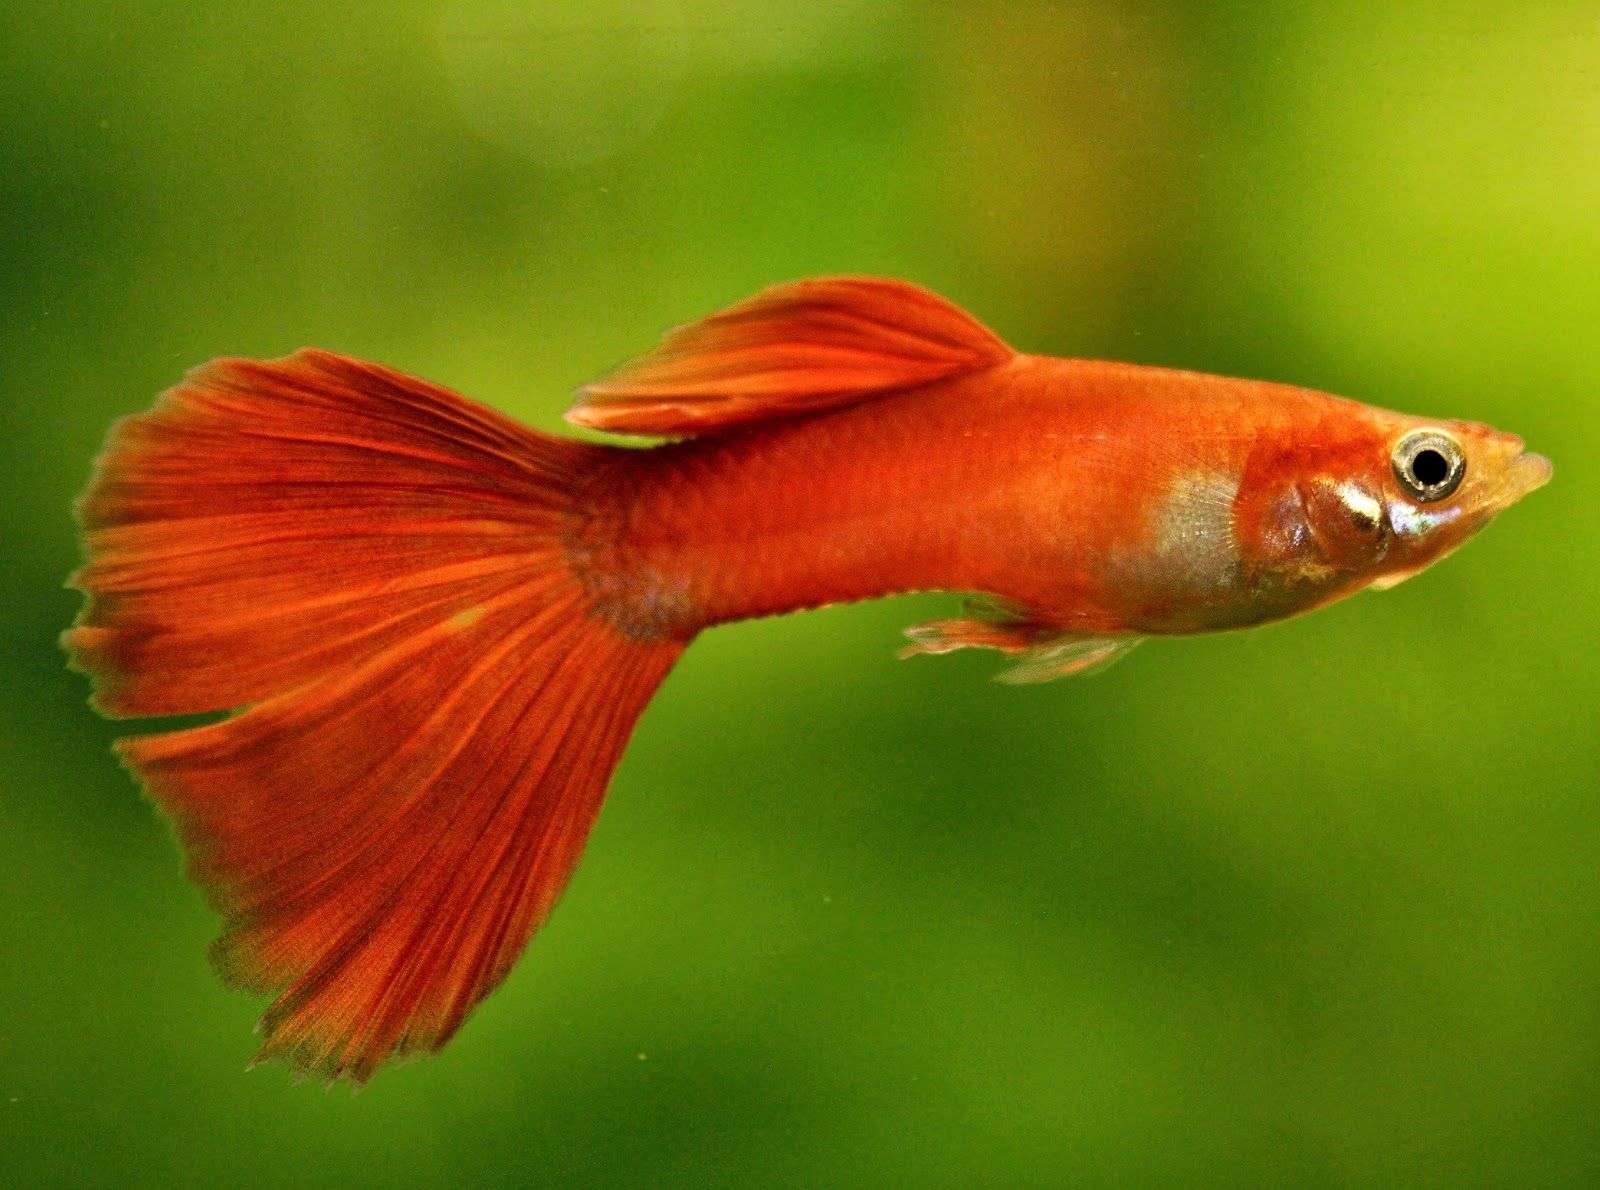 Are Guppies Tropical Fish